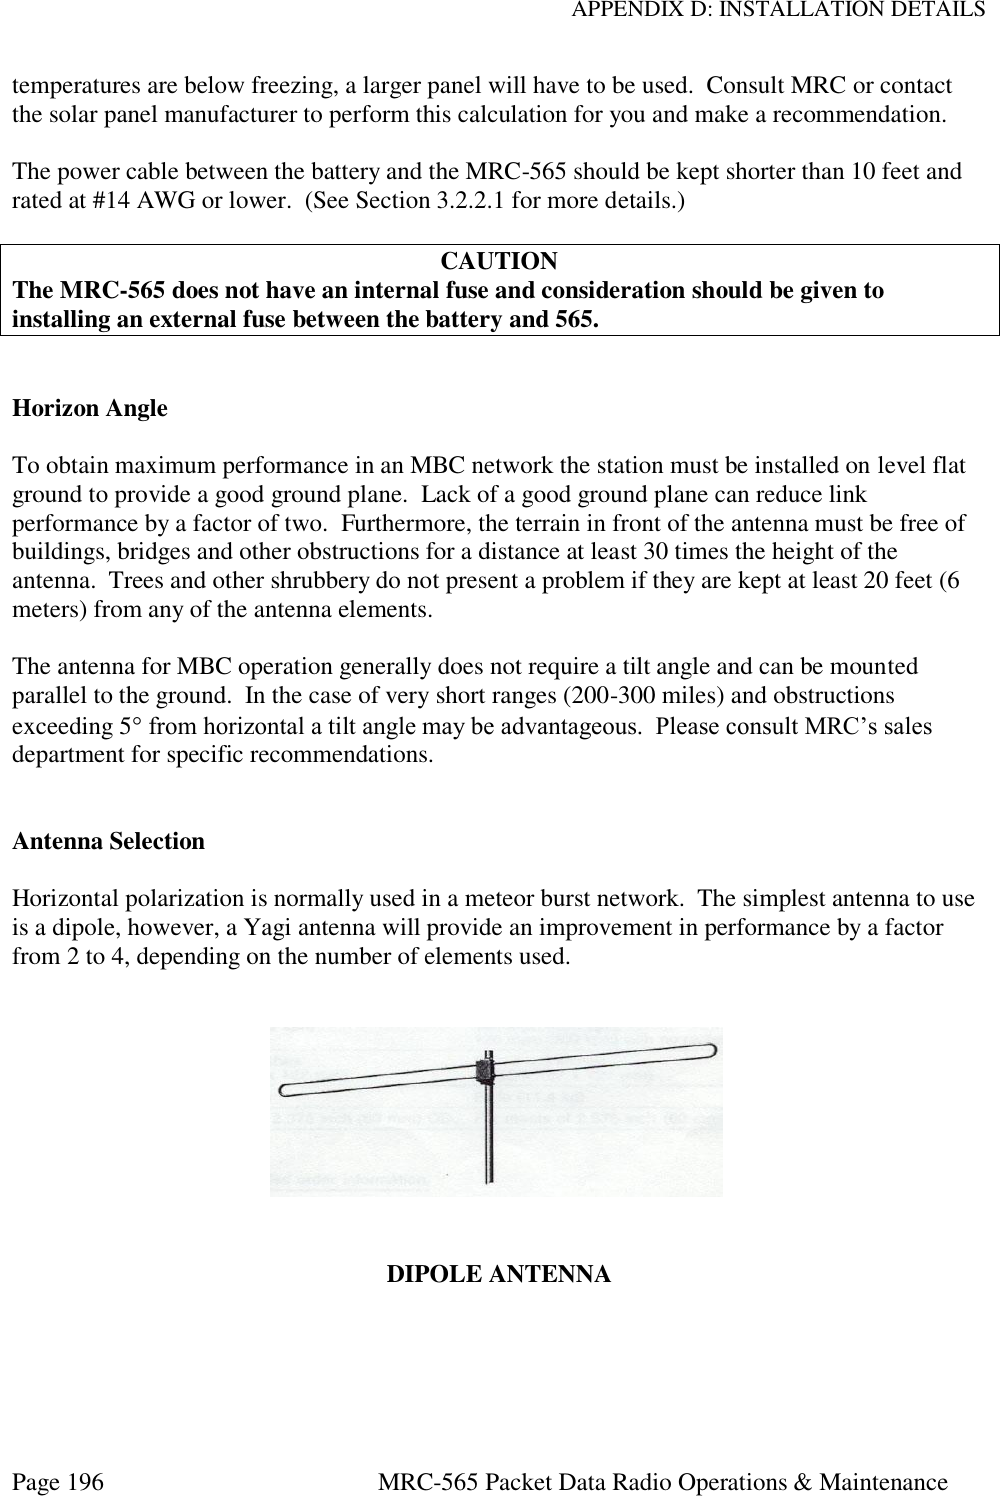 APPENDIX D: INSTALLATION DETAILS Page 196  MRC-565 Packet Data Radio Operations &amp; Maintenance temperatures are below freezing, a larger panel will have to be used.  Consult MRC or contact the solar panel manufacturer to perform this calculation for you and make a recommendation.  The power cable between the battery and the MRC-565 should be kept shorter than 10 feet and rated at #14 AWG or lower.  (See Section 3.2.2.1 for more details.)  CAUTION The MRC-565 does not have an internal fuse and consideration should be given to installing an external fuse between the battery and 565.   Horizon Angle  To obtain maximum performance in an MBC network the station must be installed on level flat ground to provide a good ground plane.  Lack of a good ground plane can reduce link performance by a factor of two.  Furthermore, the terrain in front of the antenna must be free of buildings, bridges and other obstructions for a distance at least 30 times the height of the antenna.  Trees and other shrubbery do not present a problem if they are kept at least 20 feet (6 meters) from any of the antenna elements.  The antenna for MBC operation generally does not require a tilt angle and can be mounted parallel to the ground.  In the case of very short ranges (200-300 miles) and obstructions exceeding 5 from horizontal a tilt angle may be advantageous.  Please consult MRC’s sales department for specific recommendations.   Antenna Selection  Horizontal polarization is normally used in a meteor burst network.  The simplest antenna to use is a dipole, however, a Yagi antenna will provide an improvement in performance by a factor from 2 to 4, depending on the number of elements used.      DIPOLE ANTENNA  